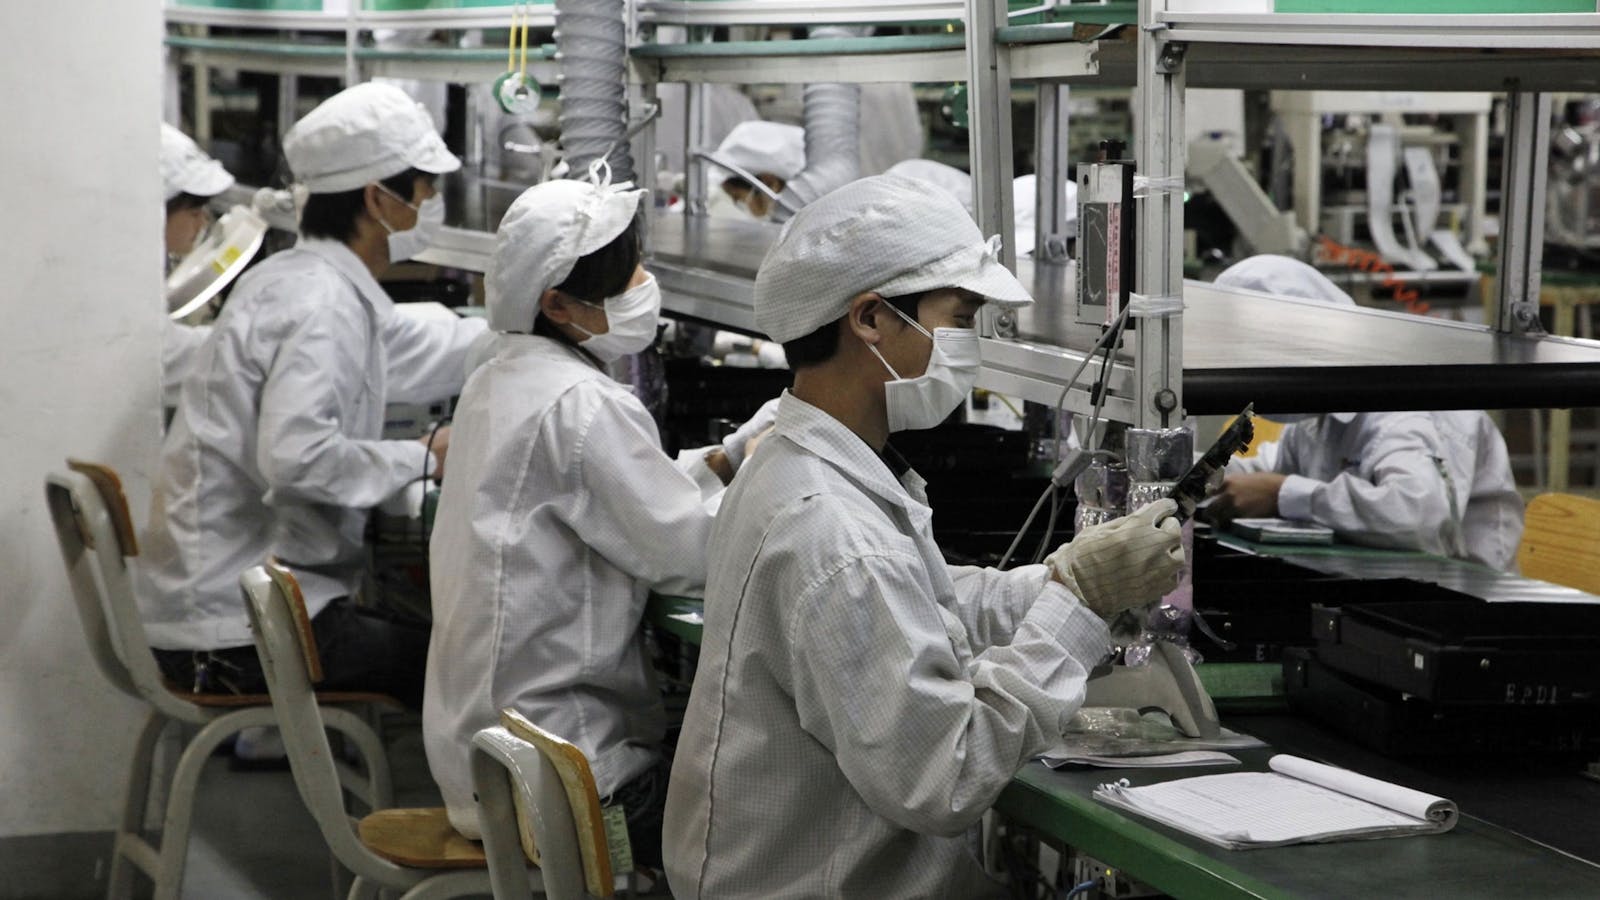 Workers at a Foxconn assembly line in Shenzhen, China. Photo by Bloomberg